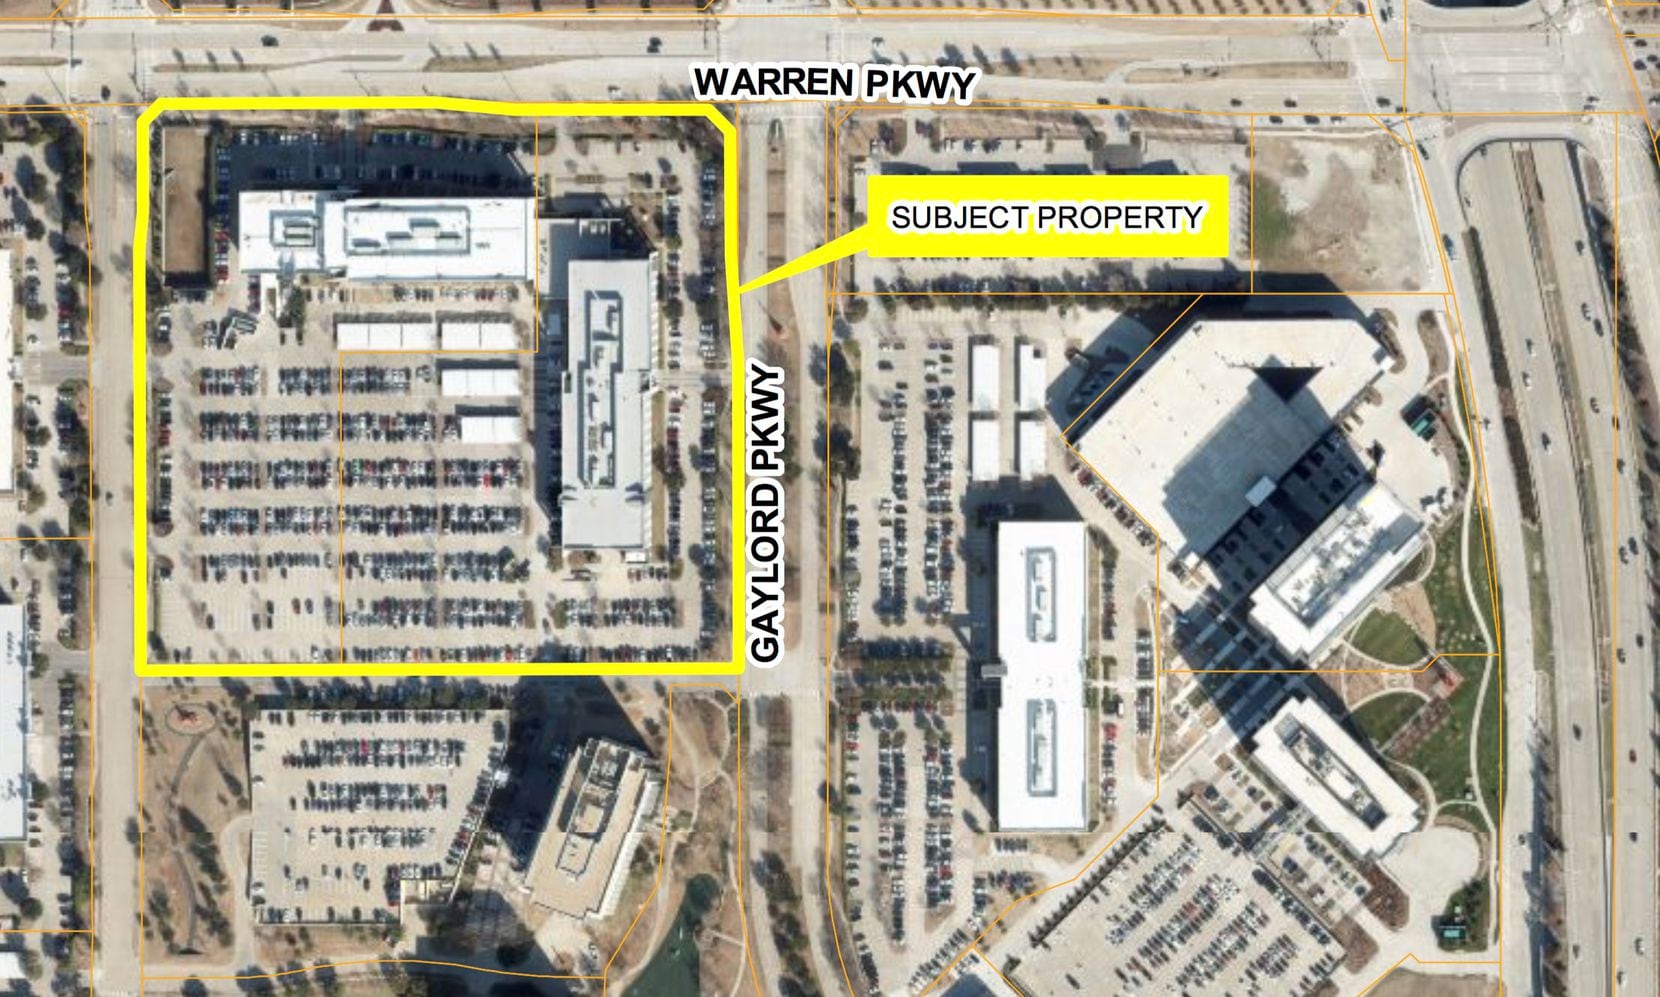 The two buildings are on Warren Parkway across the street from the Dallas Cowboys' Star development.